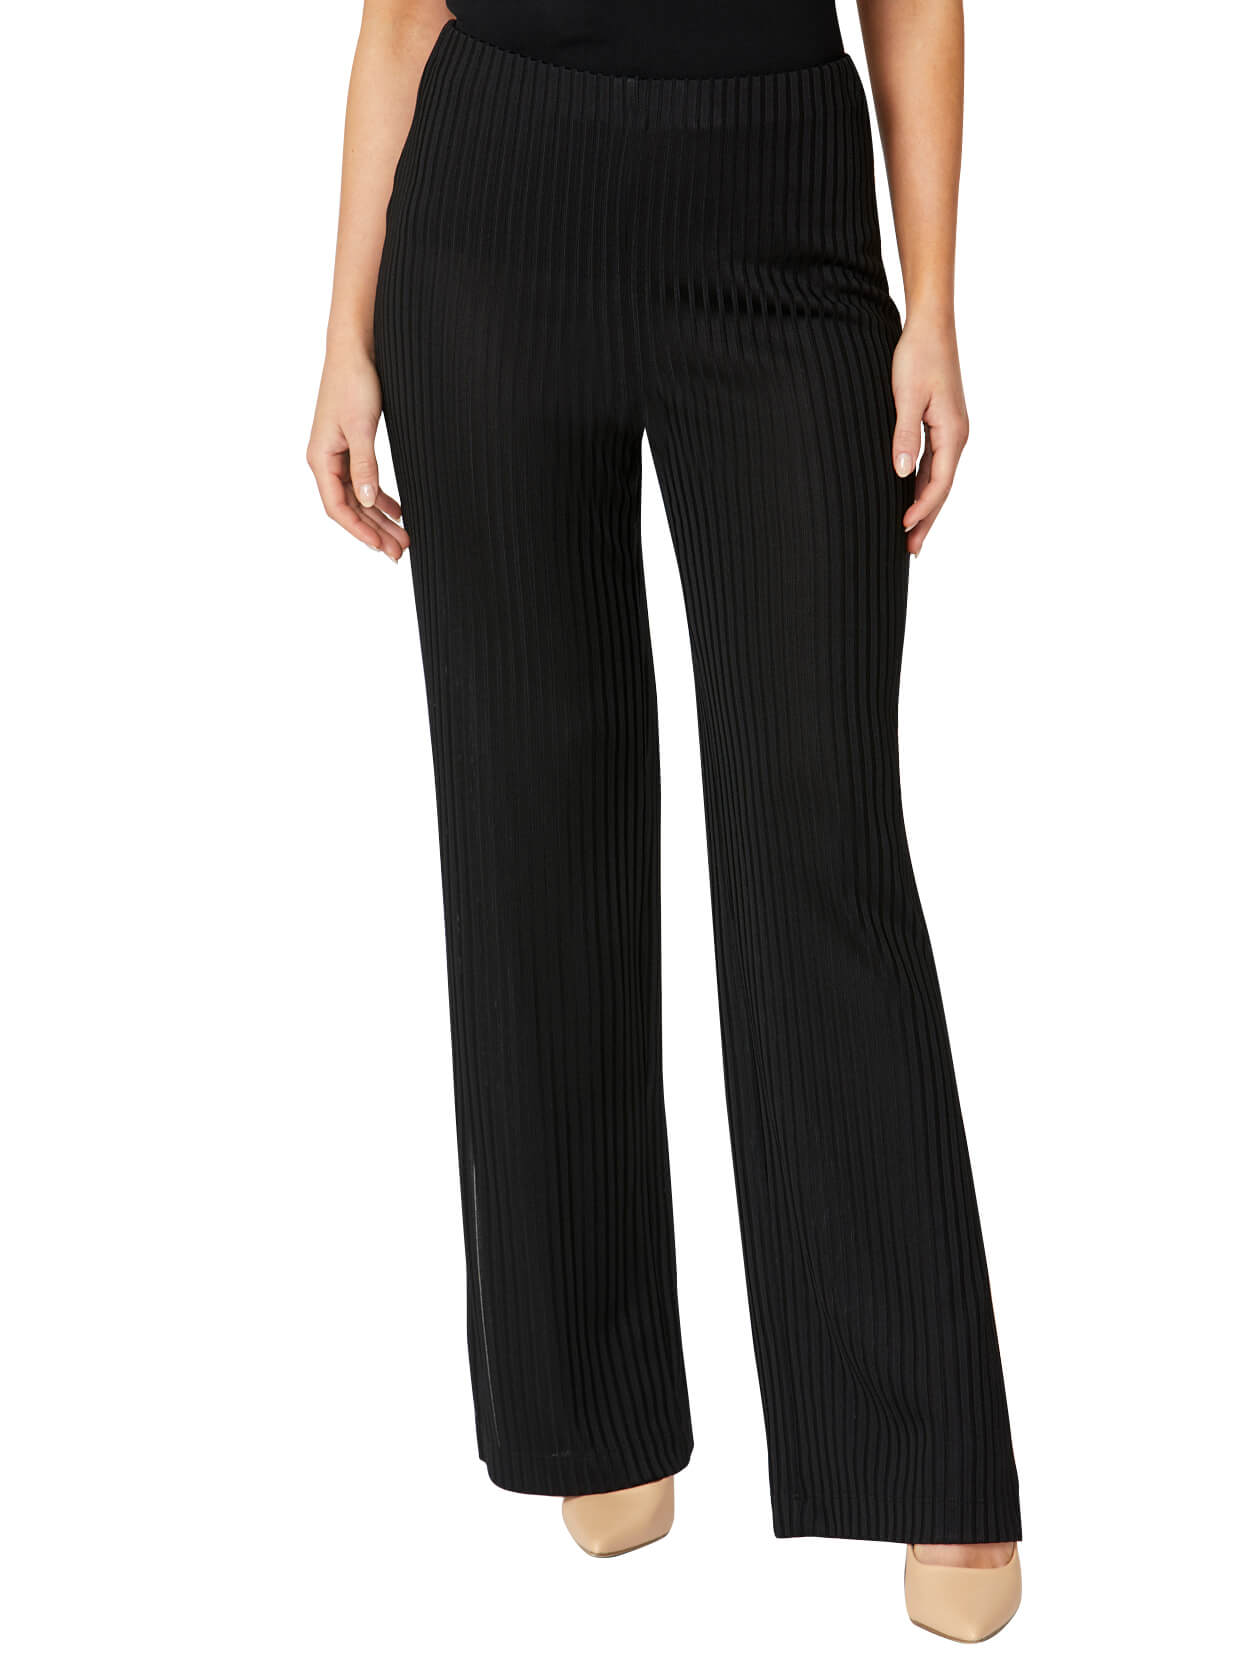 Carrie Black Pant